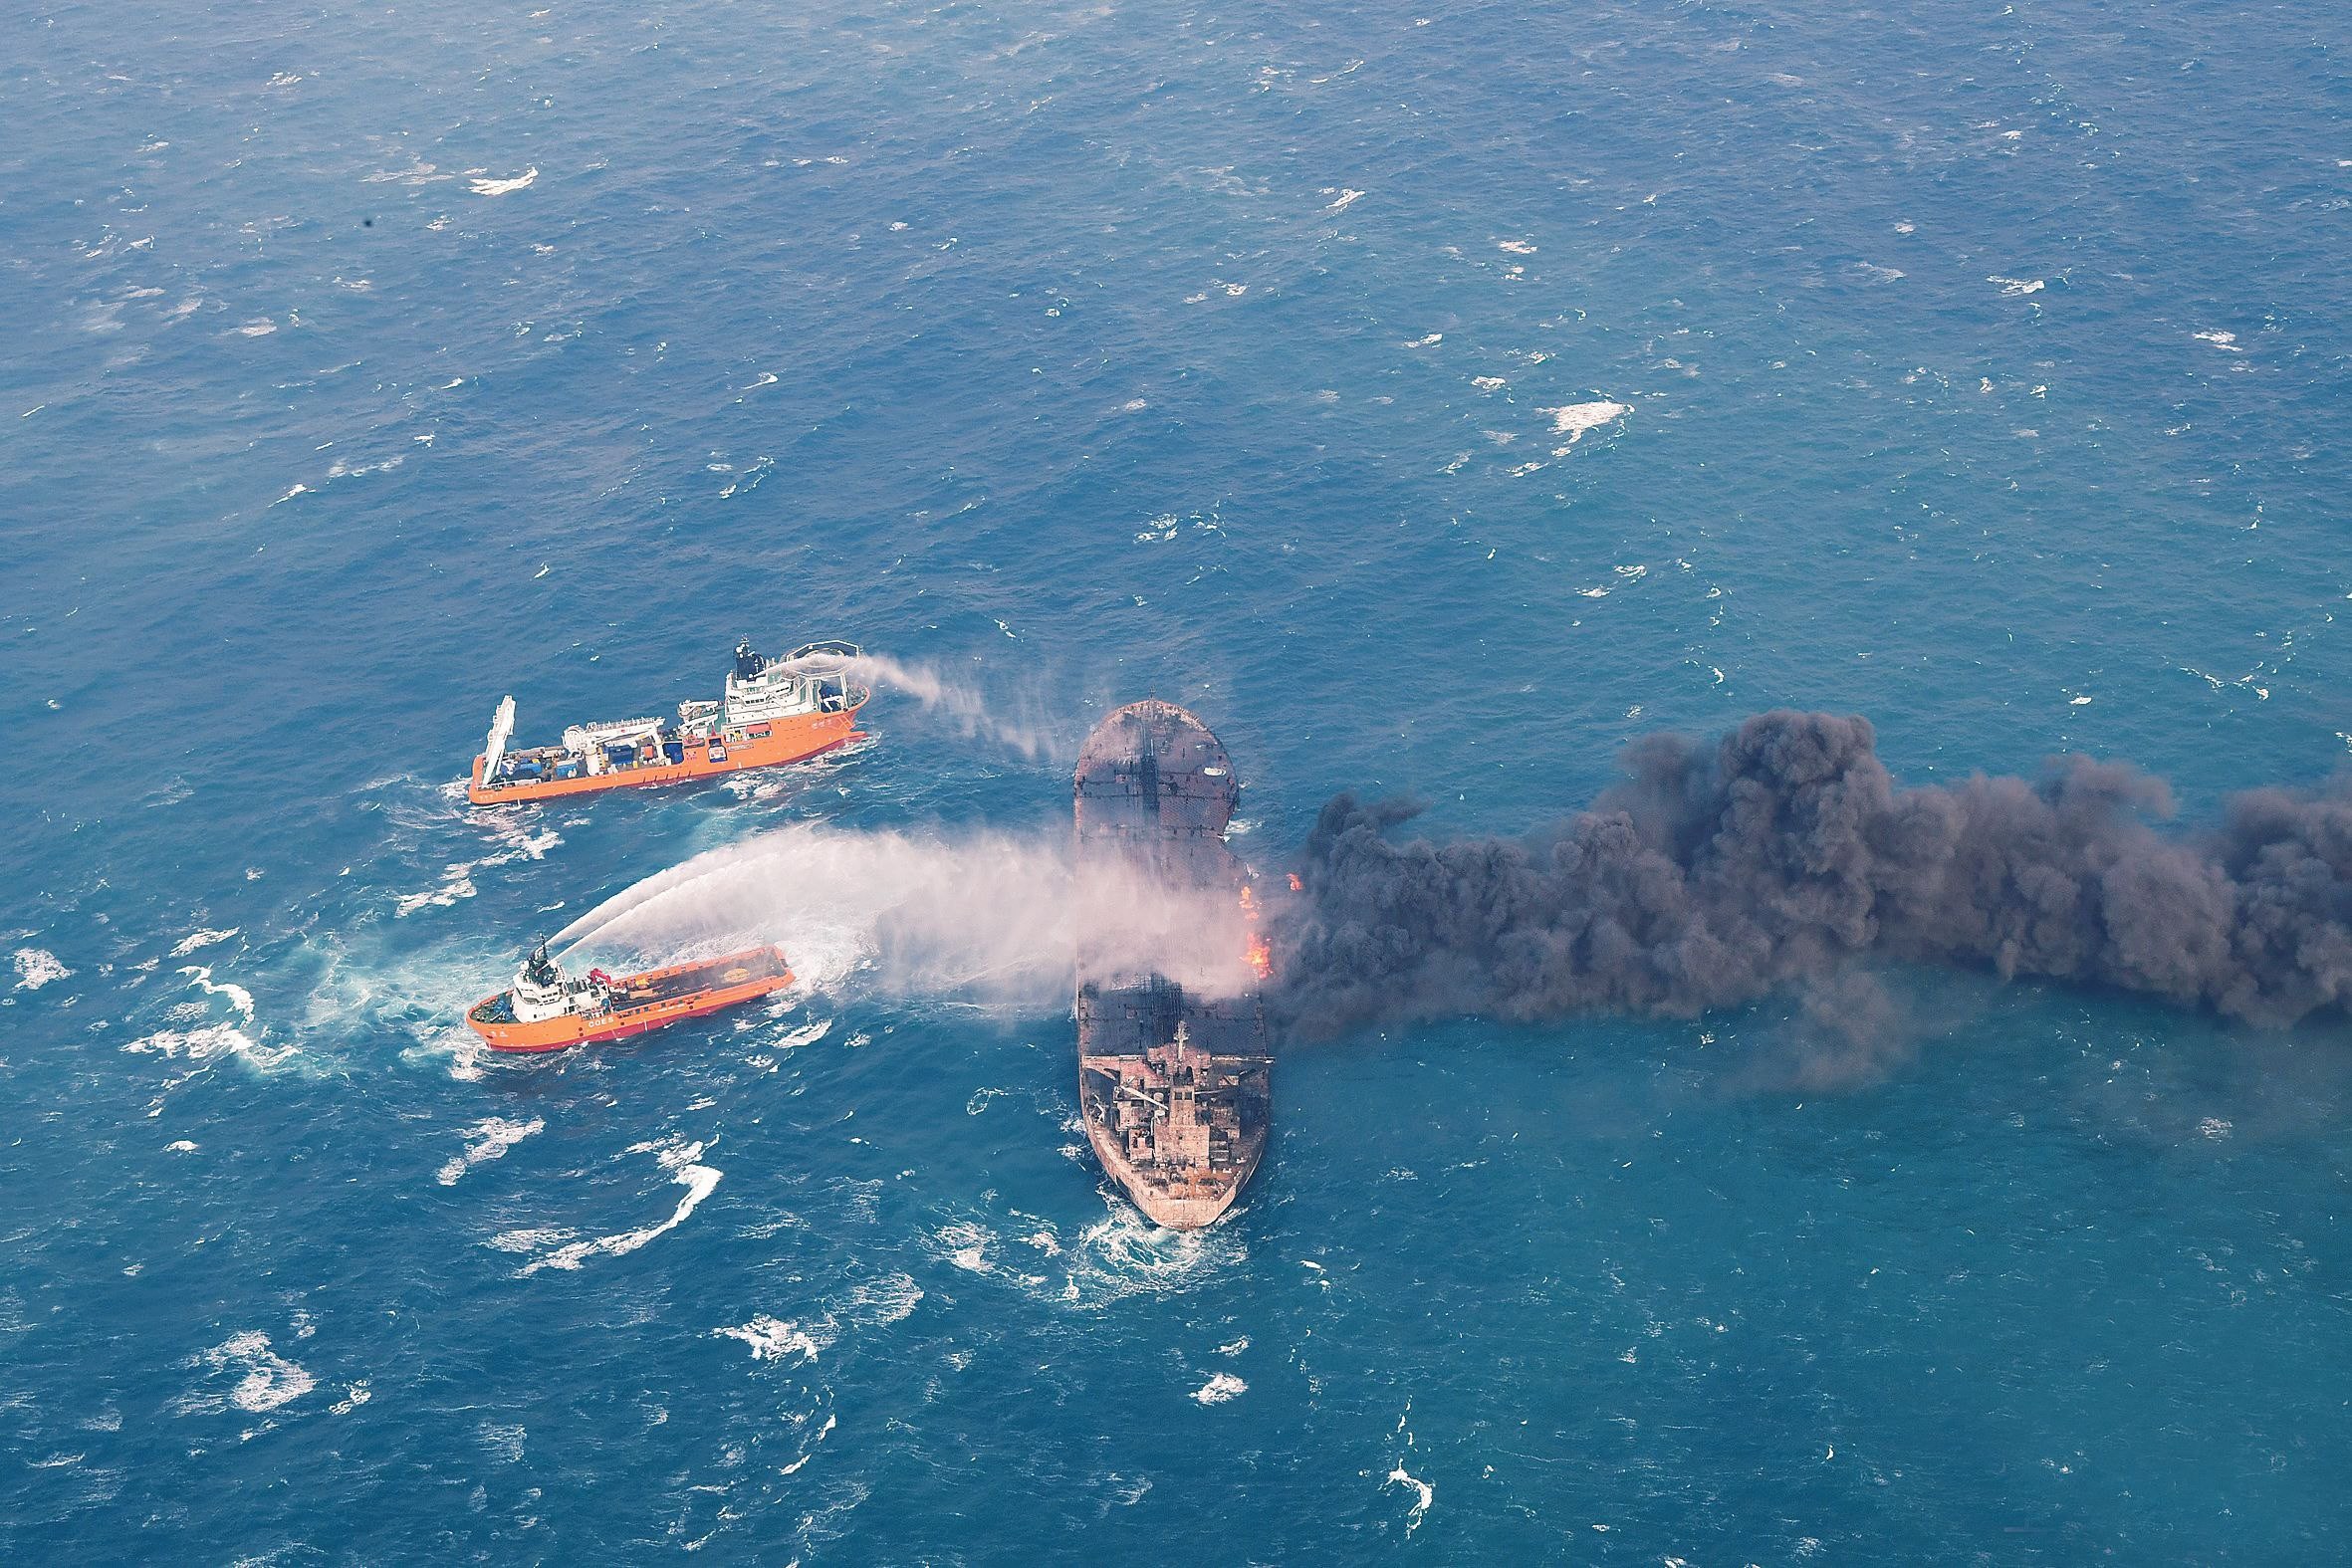 Rescue ships douse the fire on the tanker Sanchi on Jaunary 10, four days after it collided with a Hong Kong-registered freighter off China's eastern coast. Photo: EPA-EFE/Transport Ministry of China